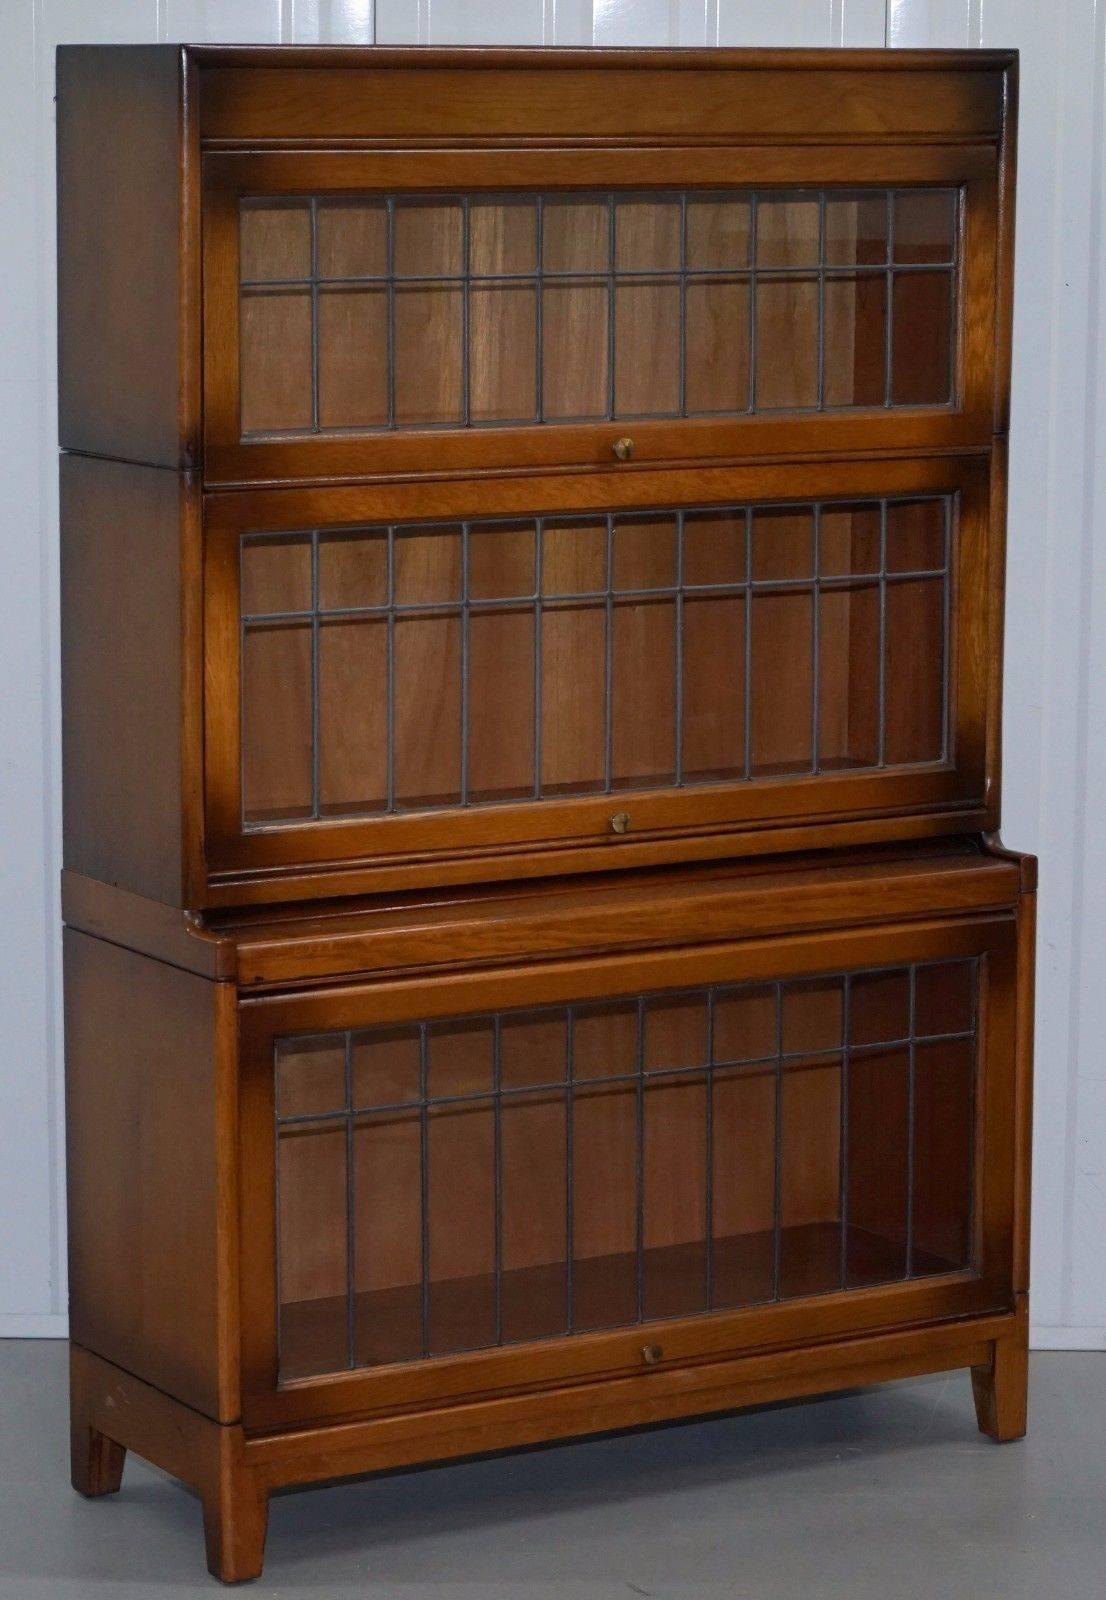 We are delighted to offer for sale this pair of Angus model by Gunn oak stacking library solicitors bookcases

A lovely well-made pair of retractable doors, the frames are solid oak the glass is free from cracks and damage and is lead lined
 
We